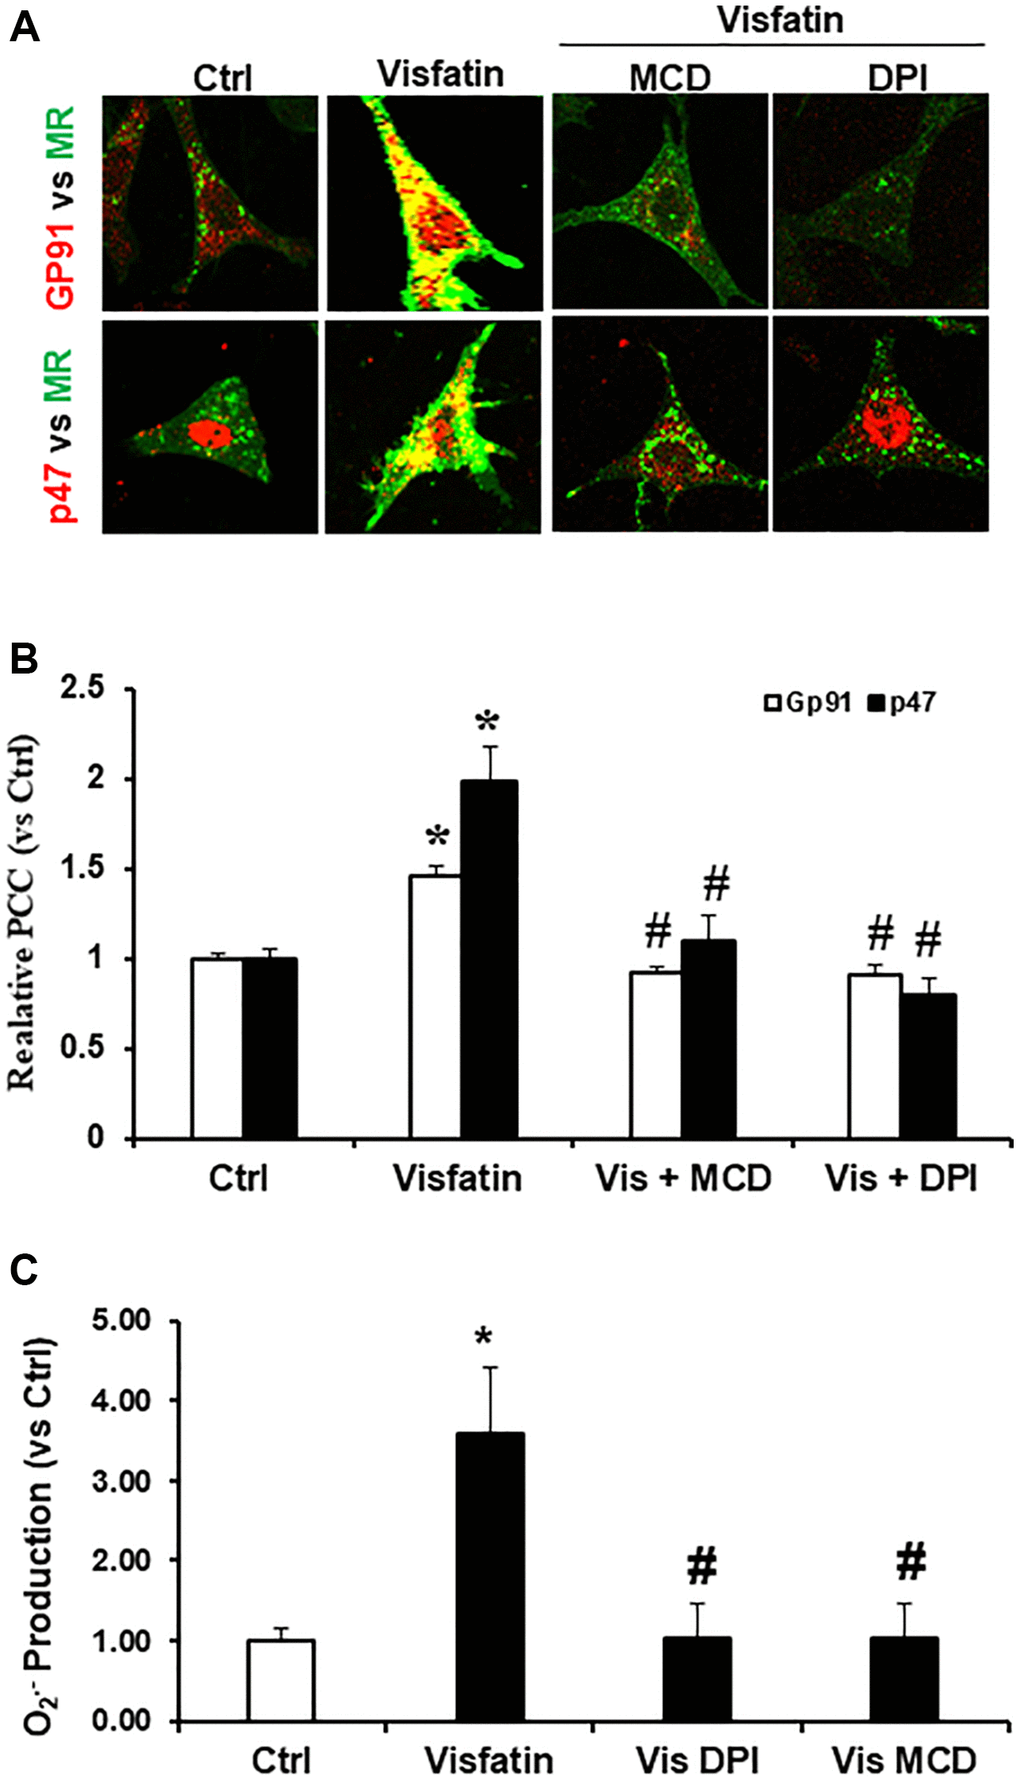 Effects of visfatin on aggregation of gp91phox, p47phox and MR clusters, O2·− production in podocytes. (A) Representative confocal microscopic images of MR clusters (Green) and aggregation of gp91phox (Red) and MR clusters and p47phox (Red) in podocytes (original magnification, 400x). Only overlaid images were presented. Yellow spots in overlaid images indicate co-localization of the MR and gp91phox or p47 phox. (B) Summarized data showing the effects of Visfatin, MR disruptor, MCD and NADPH oxidase inhibitors DPI on MR- gp91phox or MR-p47clusters (n = 6). Values are means ± SEM, showing fold changes as compared with control. (C) Summarized data showing the effects of visfatin on O2·− production (n = 5 − 7). Values are means ± SEM, showing fold changes as compared with control. Abbreviations: Ctrl: Control; Vis: Visfatin; DPI: diphenyleneiodonium; MCD: methyl-β-cyclodextrin. *P #P 